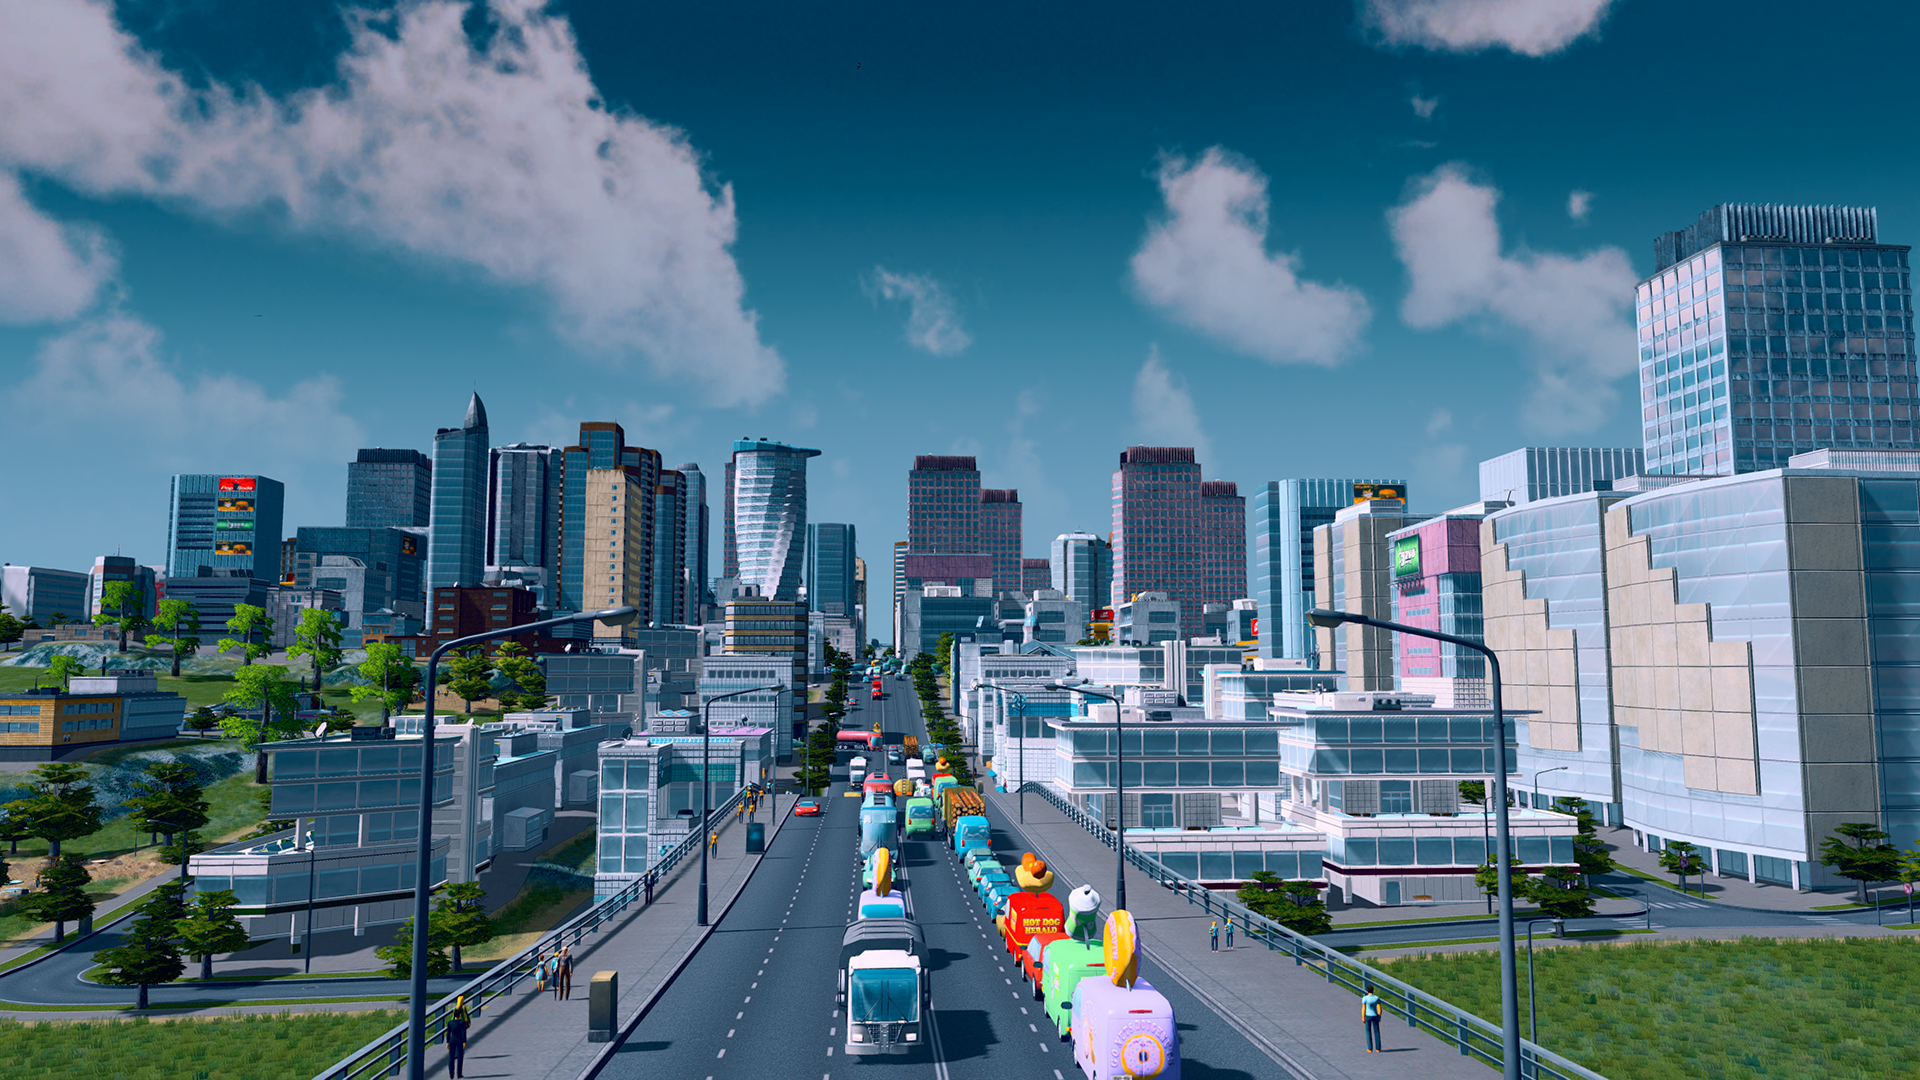 cities skylines pc game